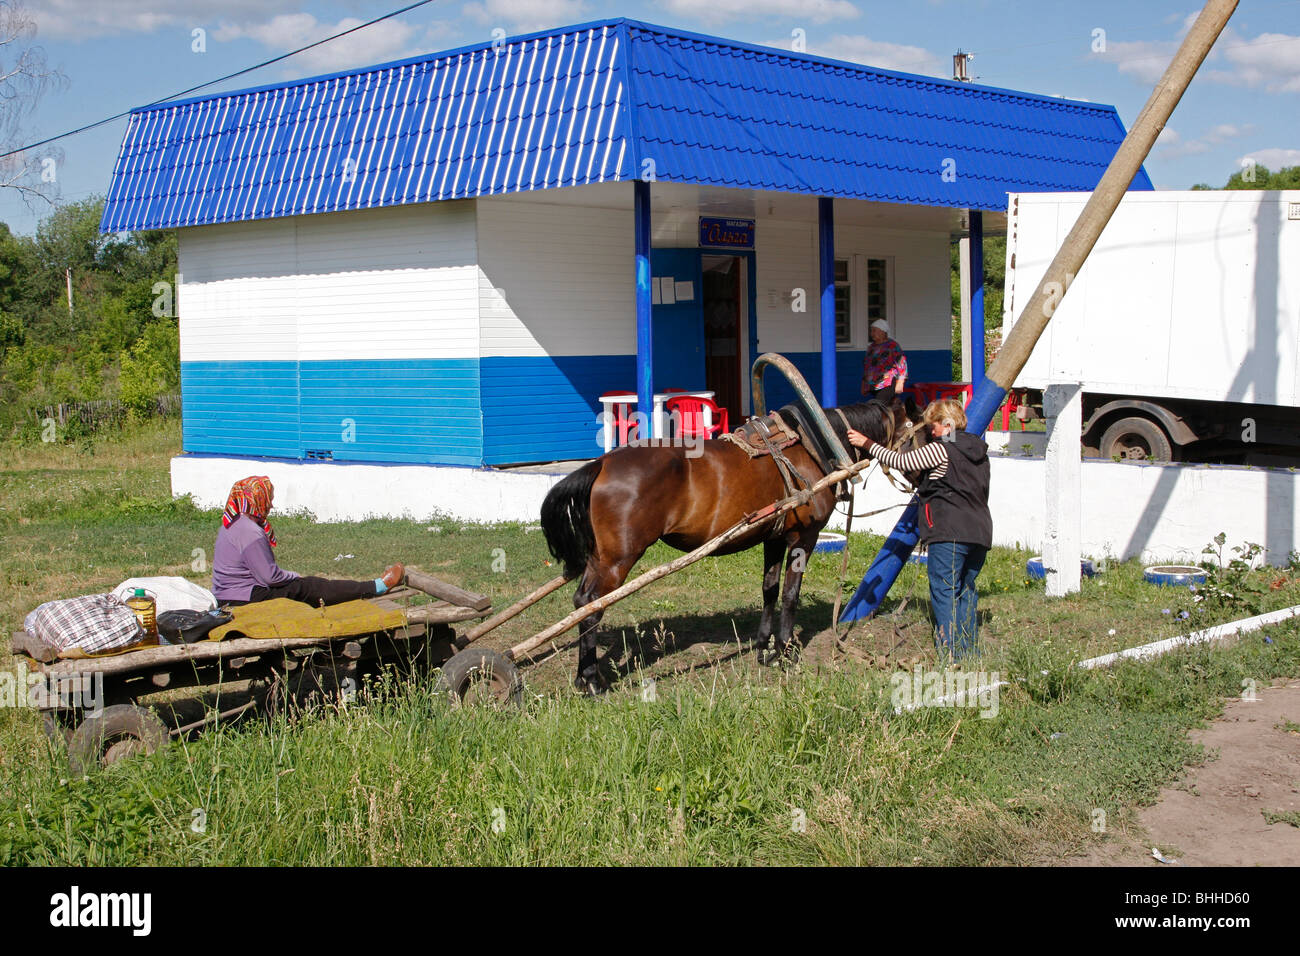 A couple of Russian women came on horse driven cart to buy products in the village shop. Stock Photo